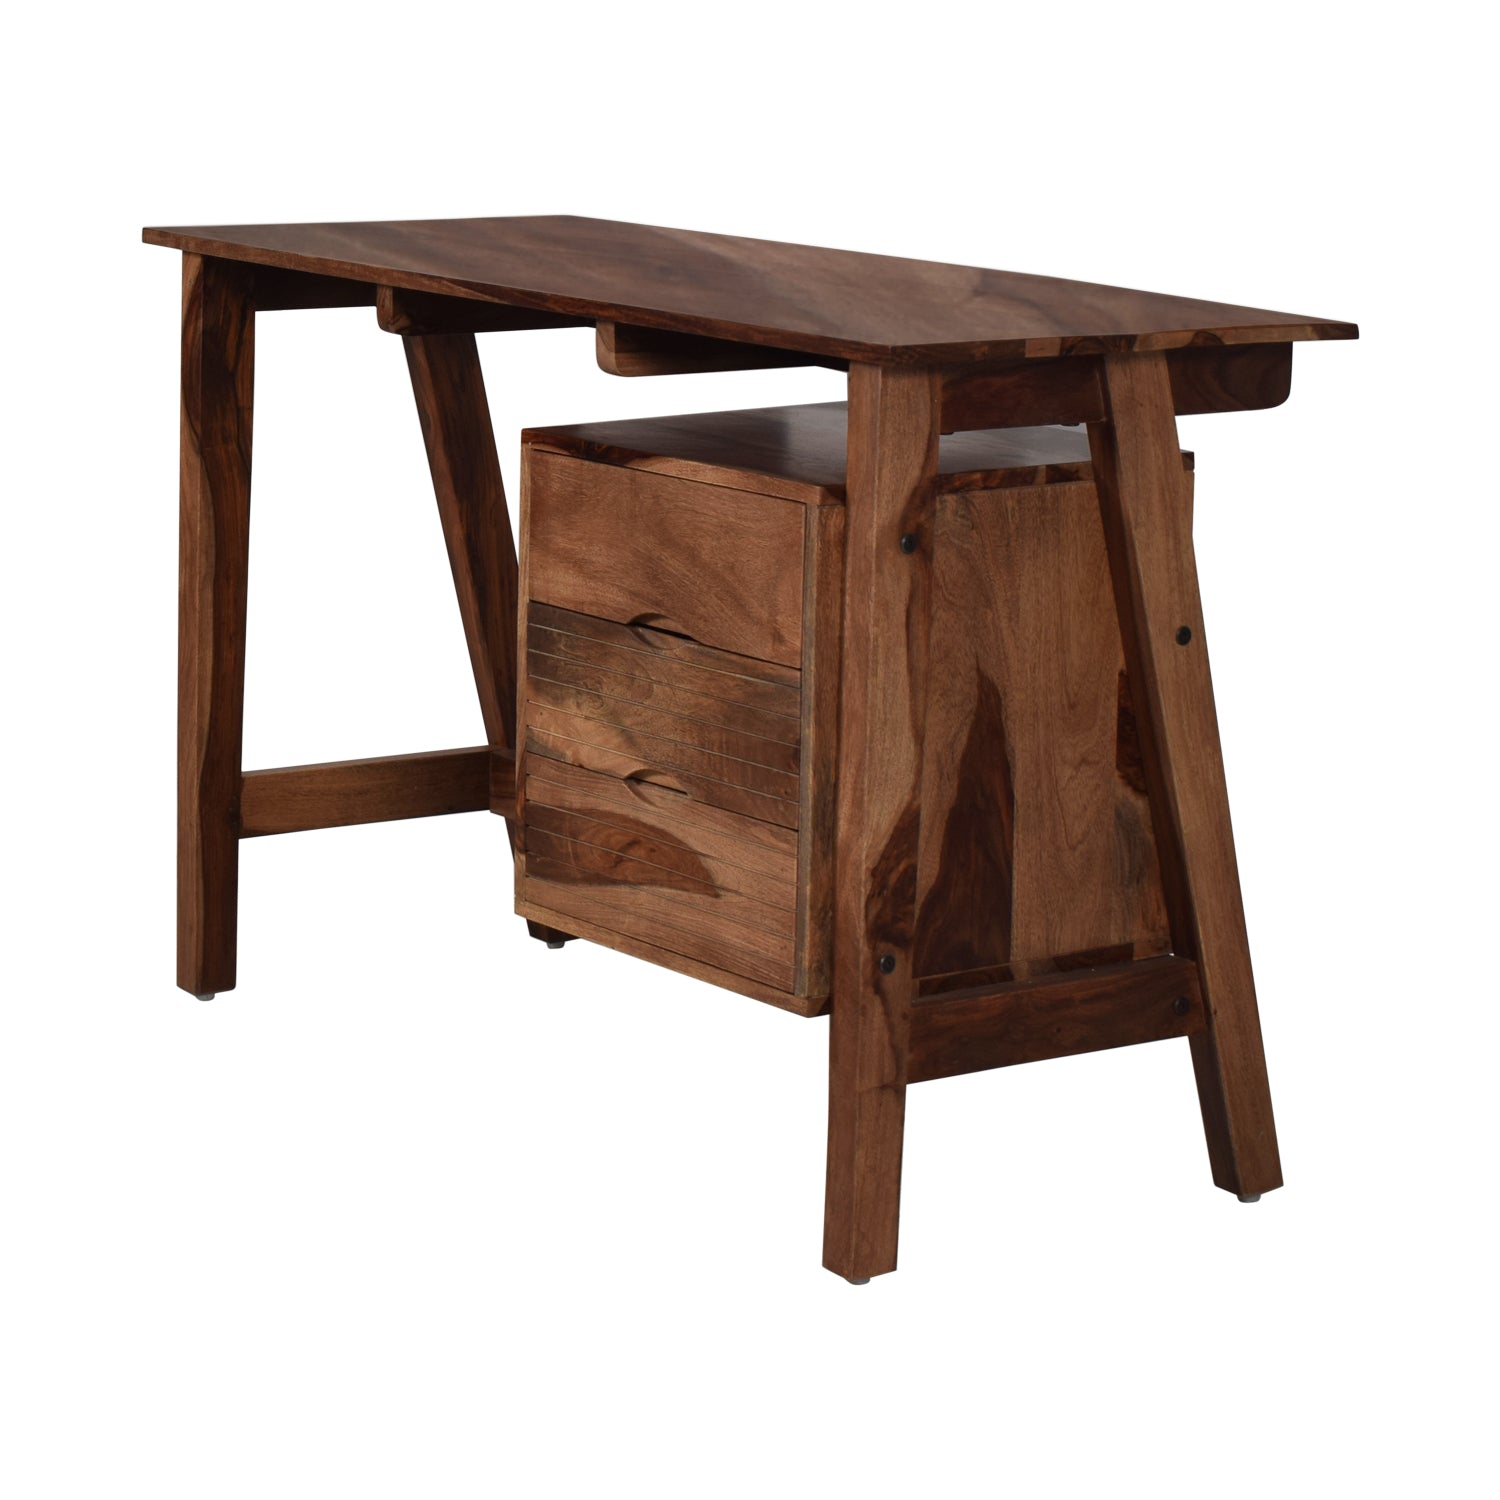 Avian Study Table WIth Storage In Sheesham Wood